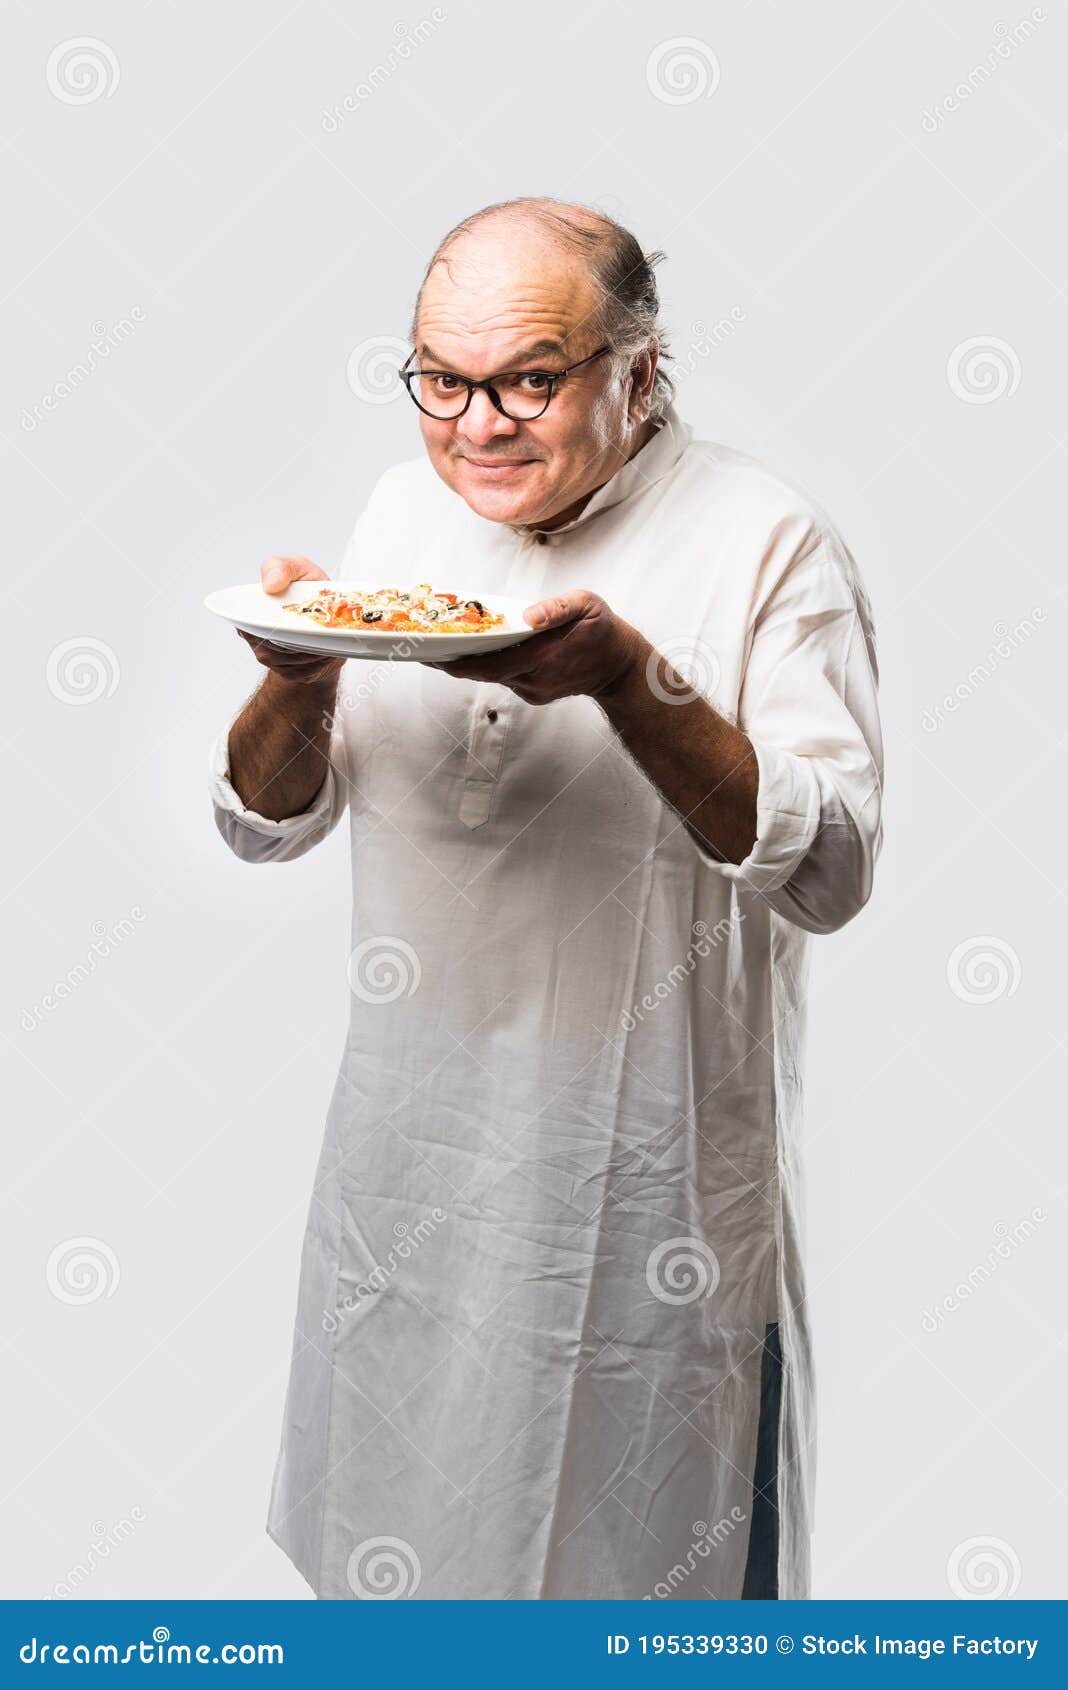 Asian Indian Old Man Eating Pizza with Funny Expressions Stock Photo -  Image of elderly, attractive: 195339330